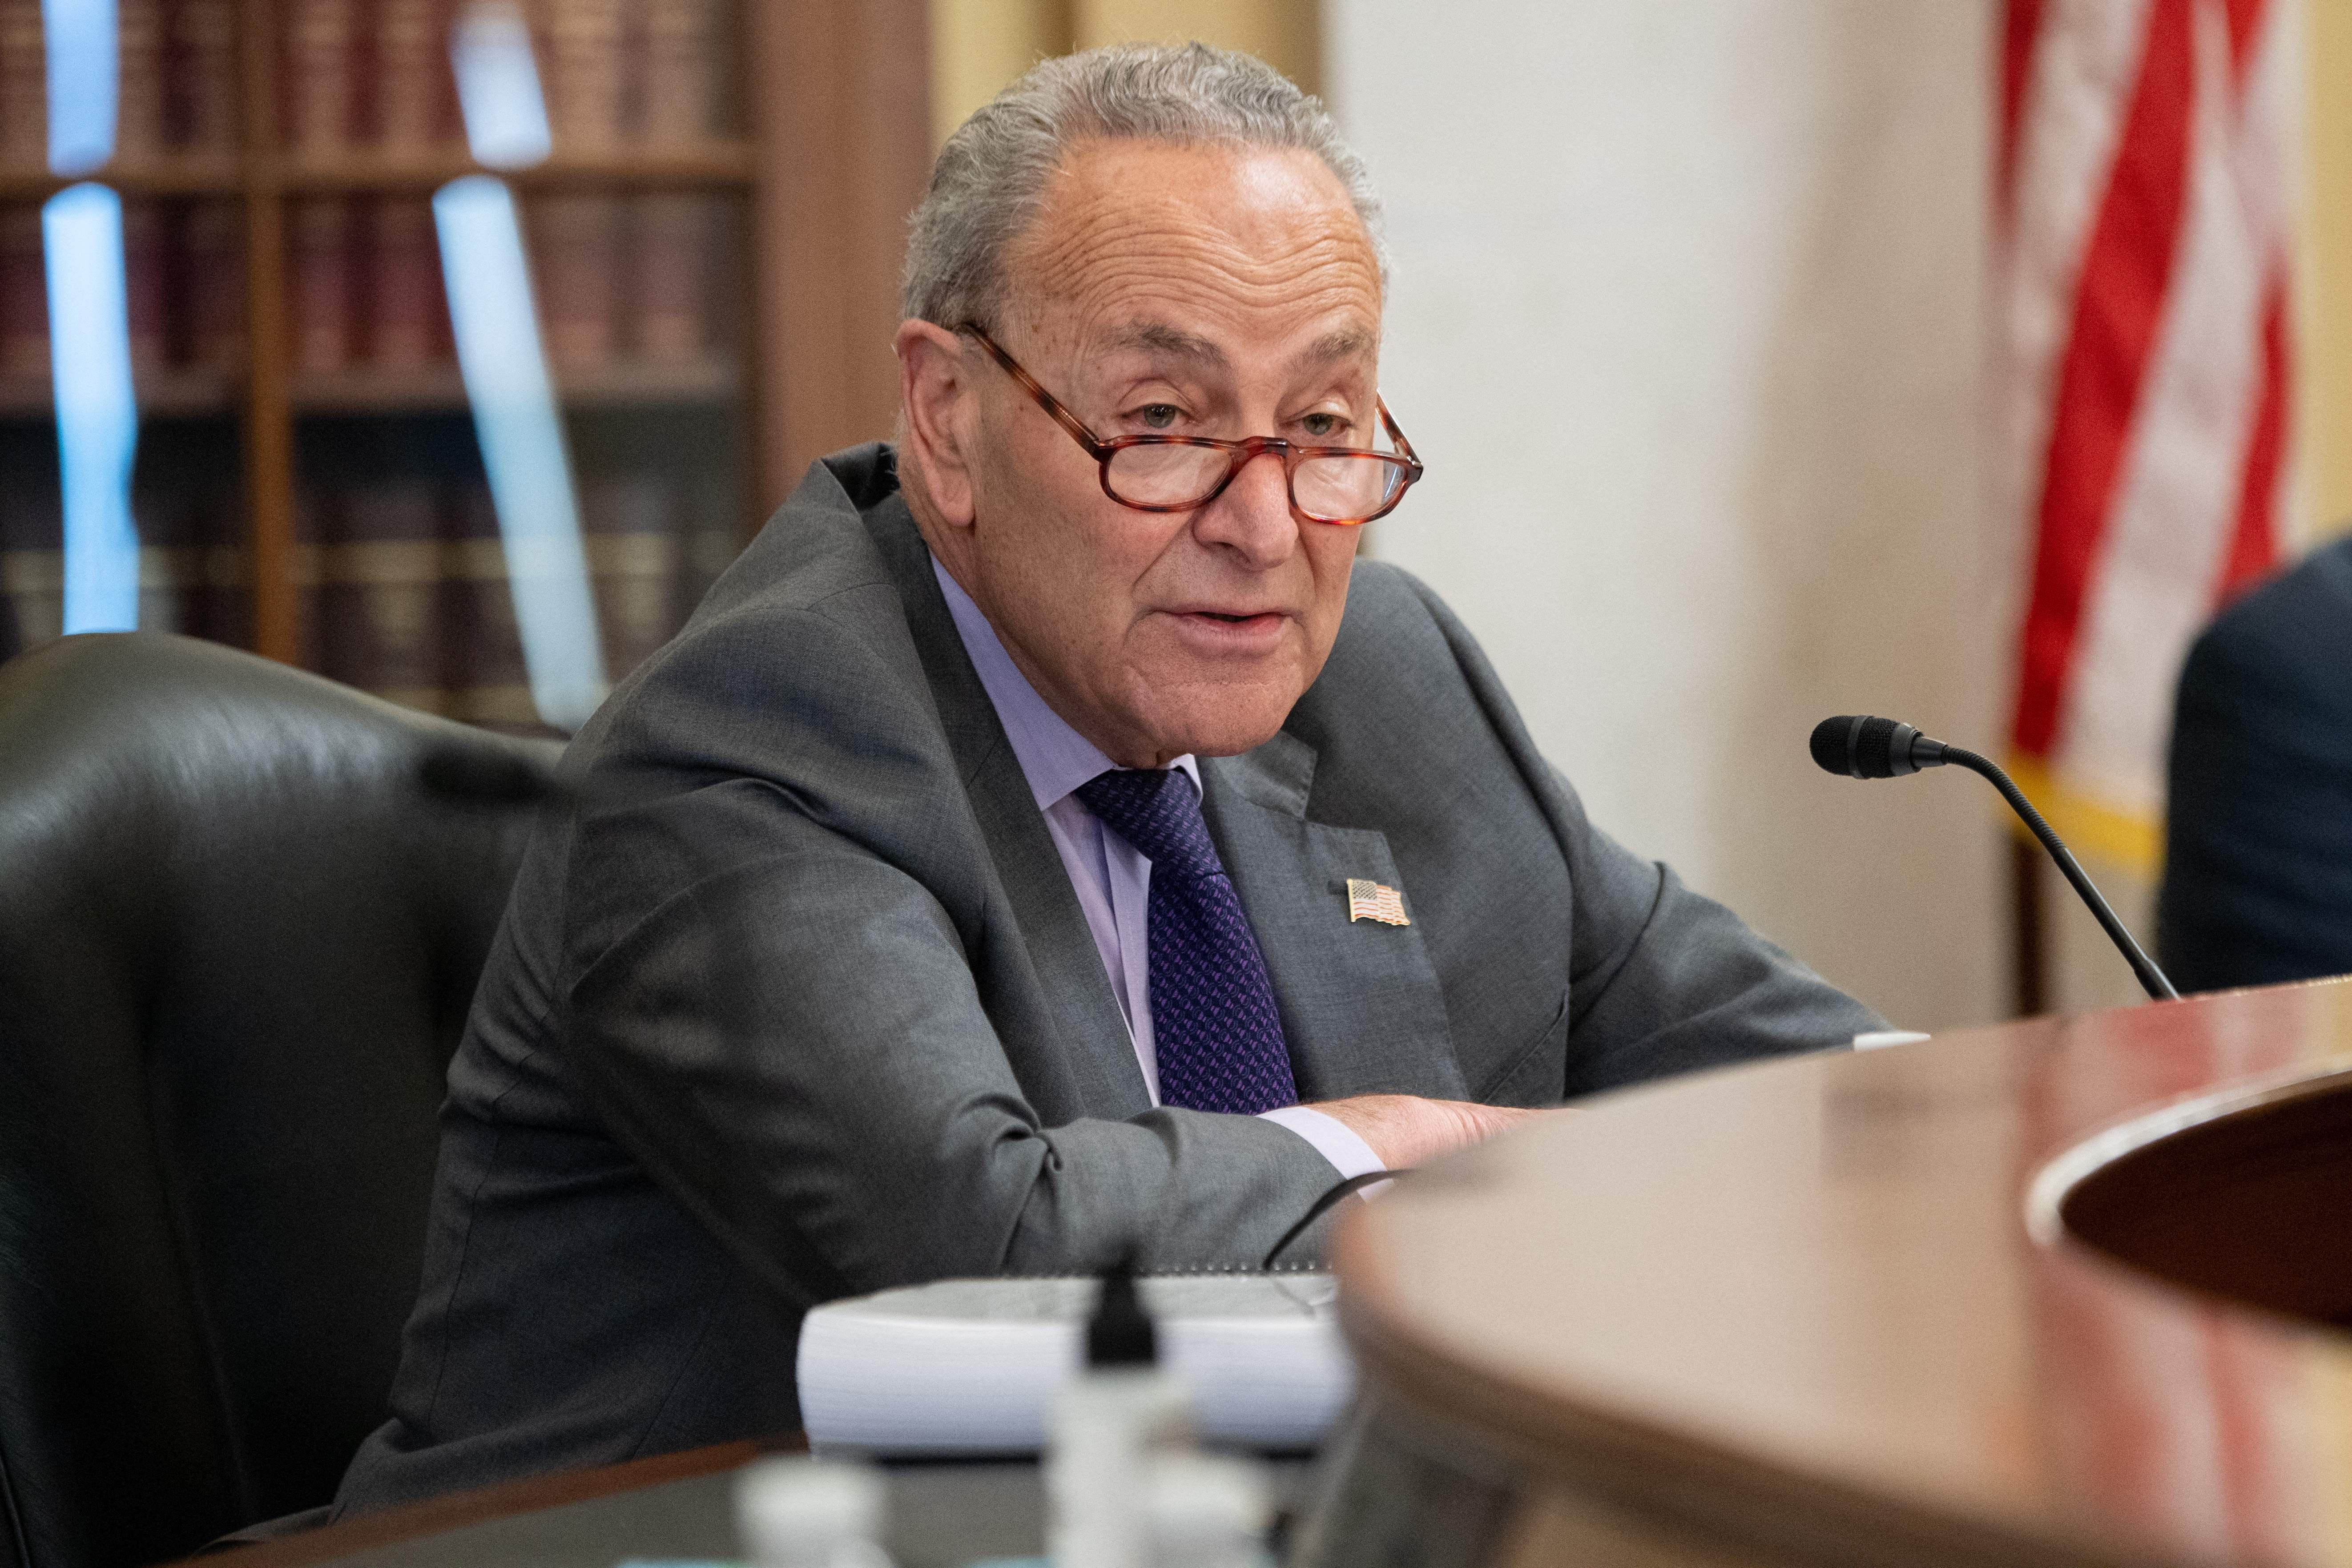 Schumer sits at a desk with a mic in front of him